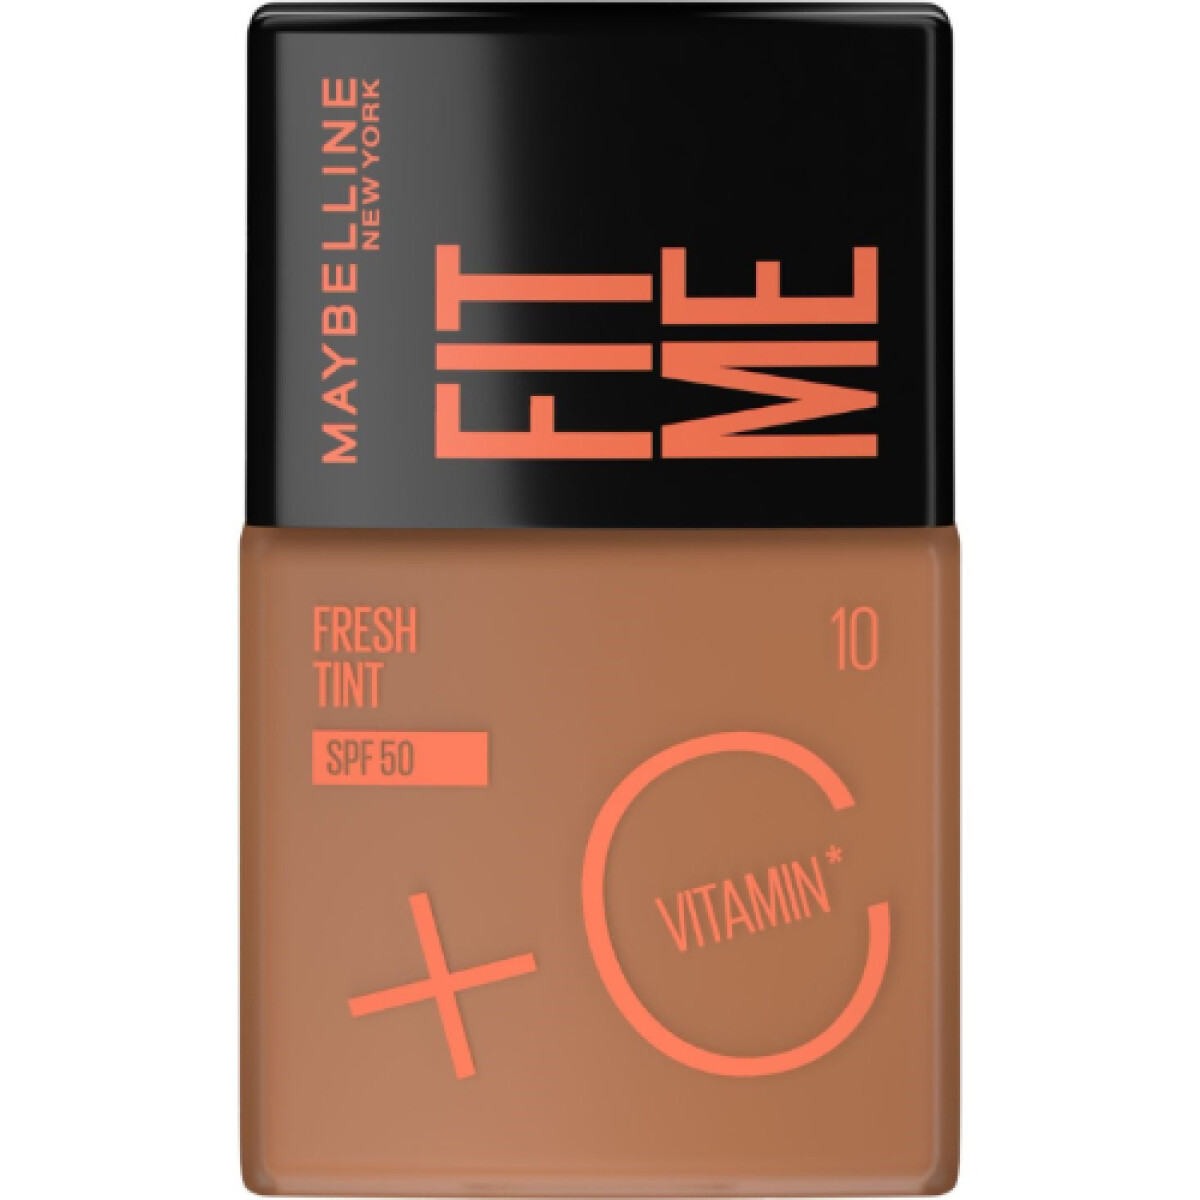 Maybelline Base Fit Me Fresh Tint Spf50 10 As X 1 Un 